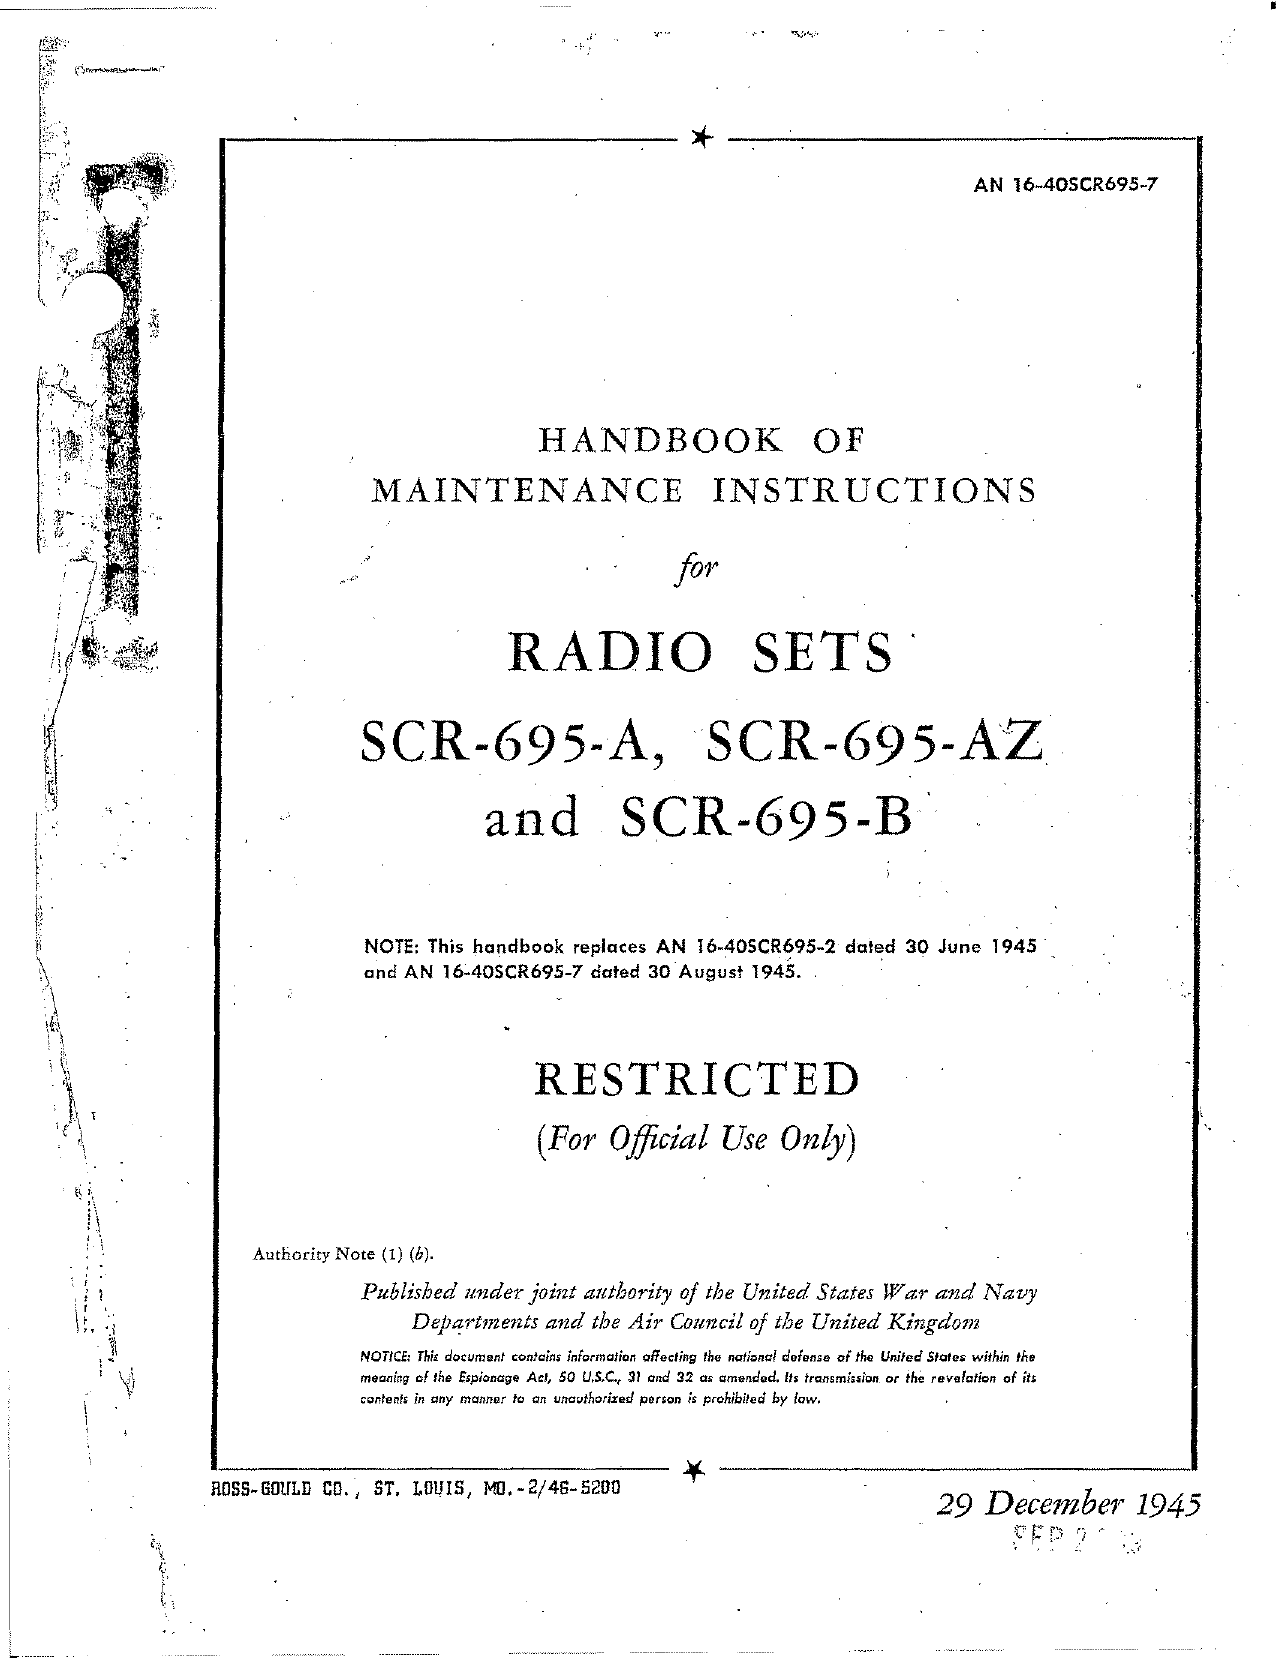 Sample page 1 from AirCorps Library document: Maintenance Instructions for Radio Sets SCR-695-A, -AZ, and -B